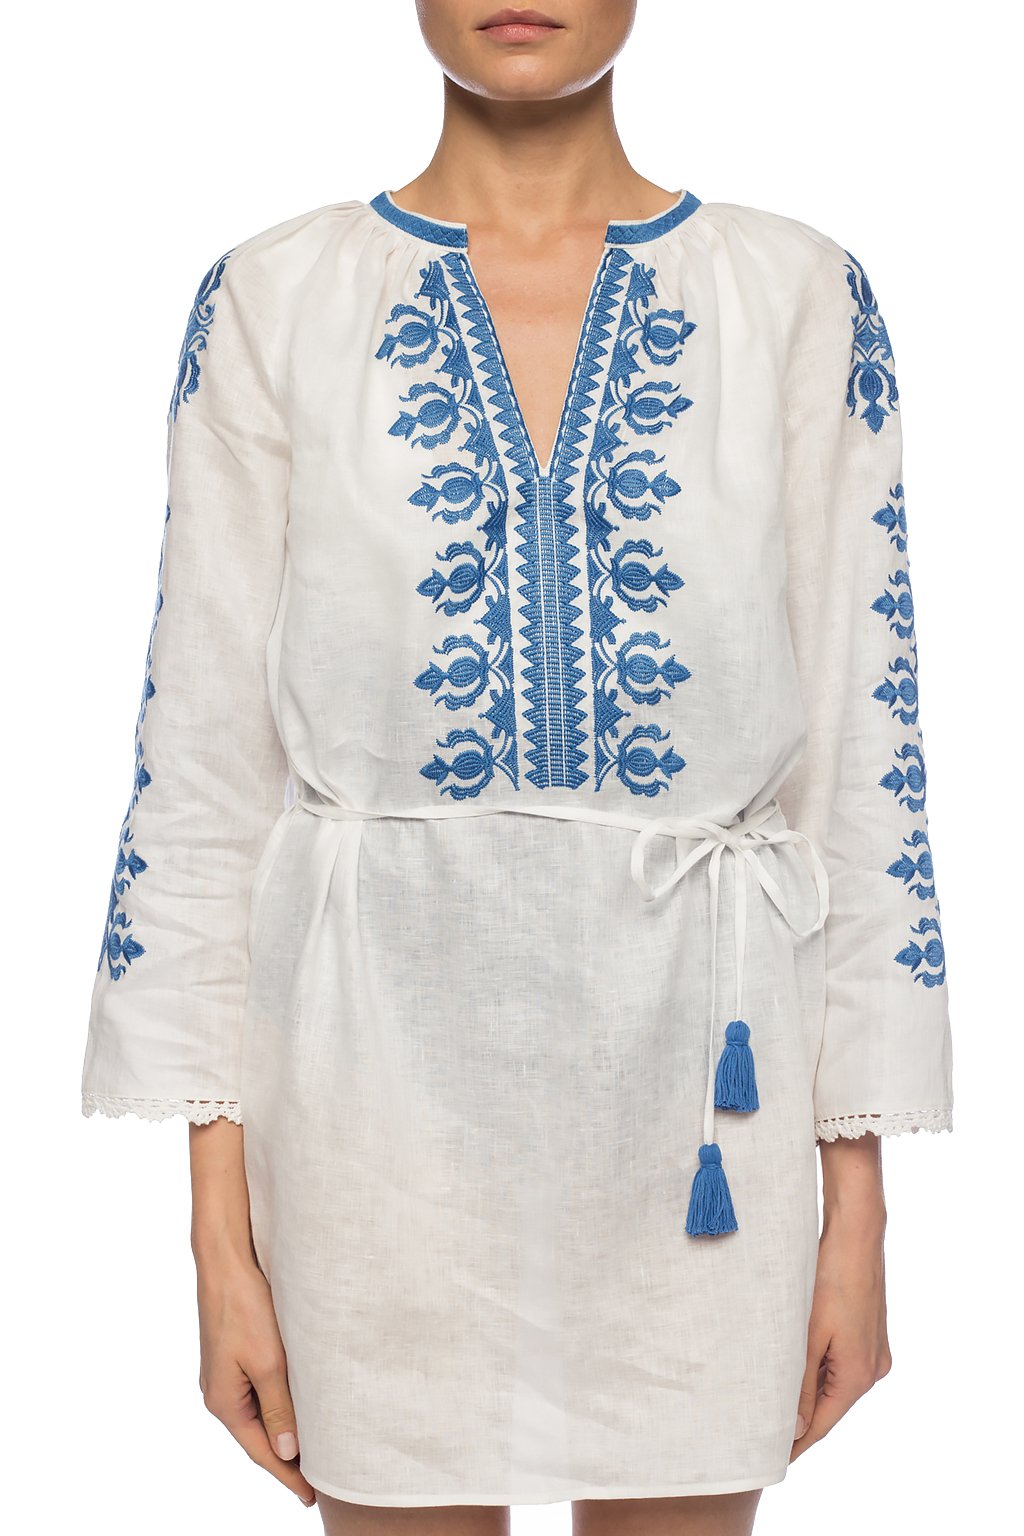 White Embroidered dress Tory Burch - Vitkac TW